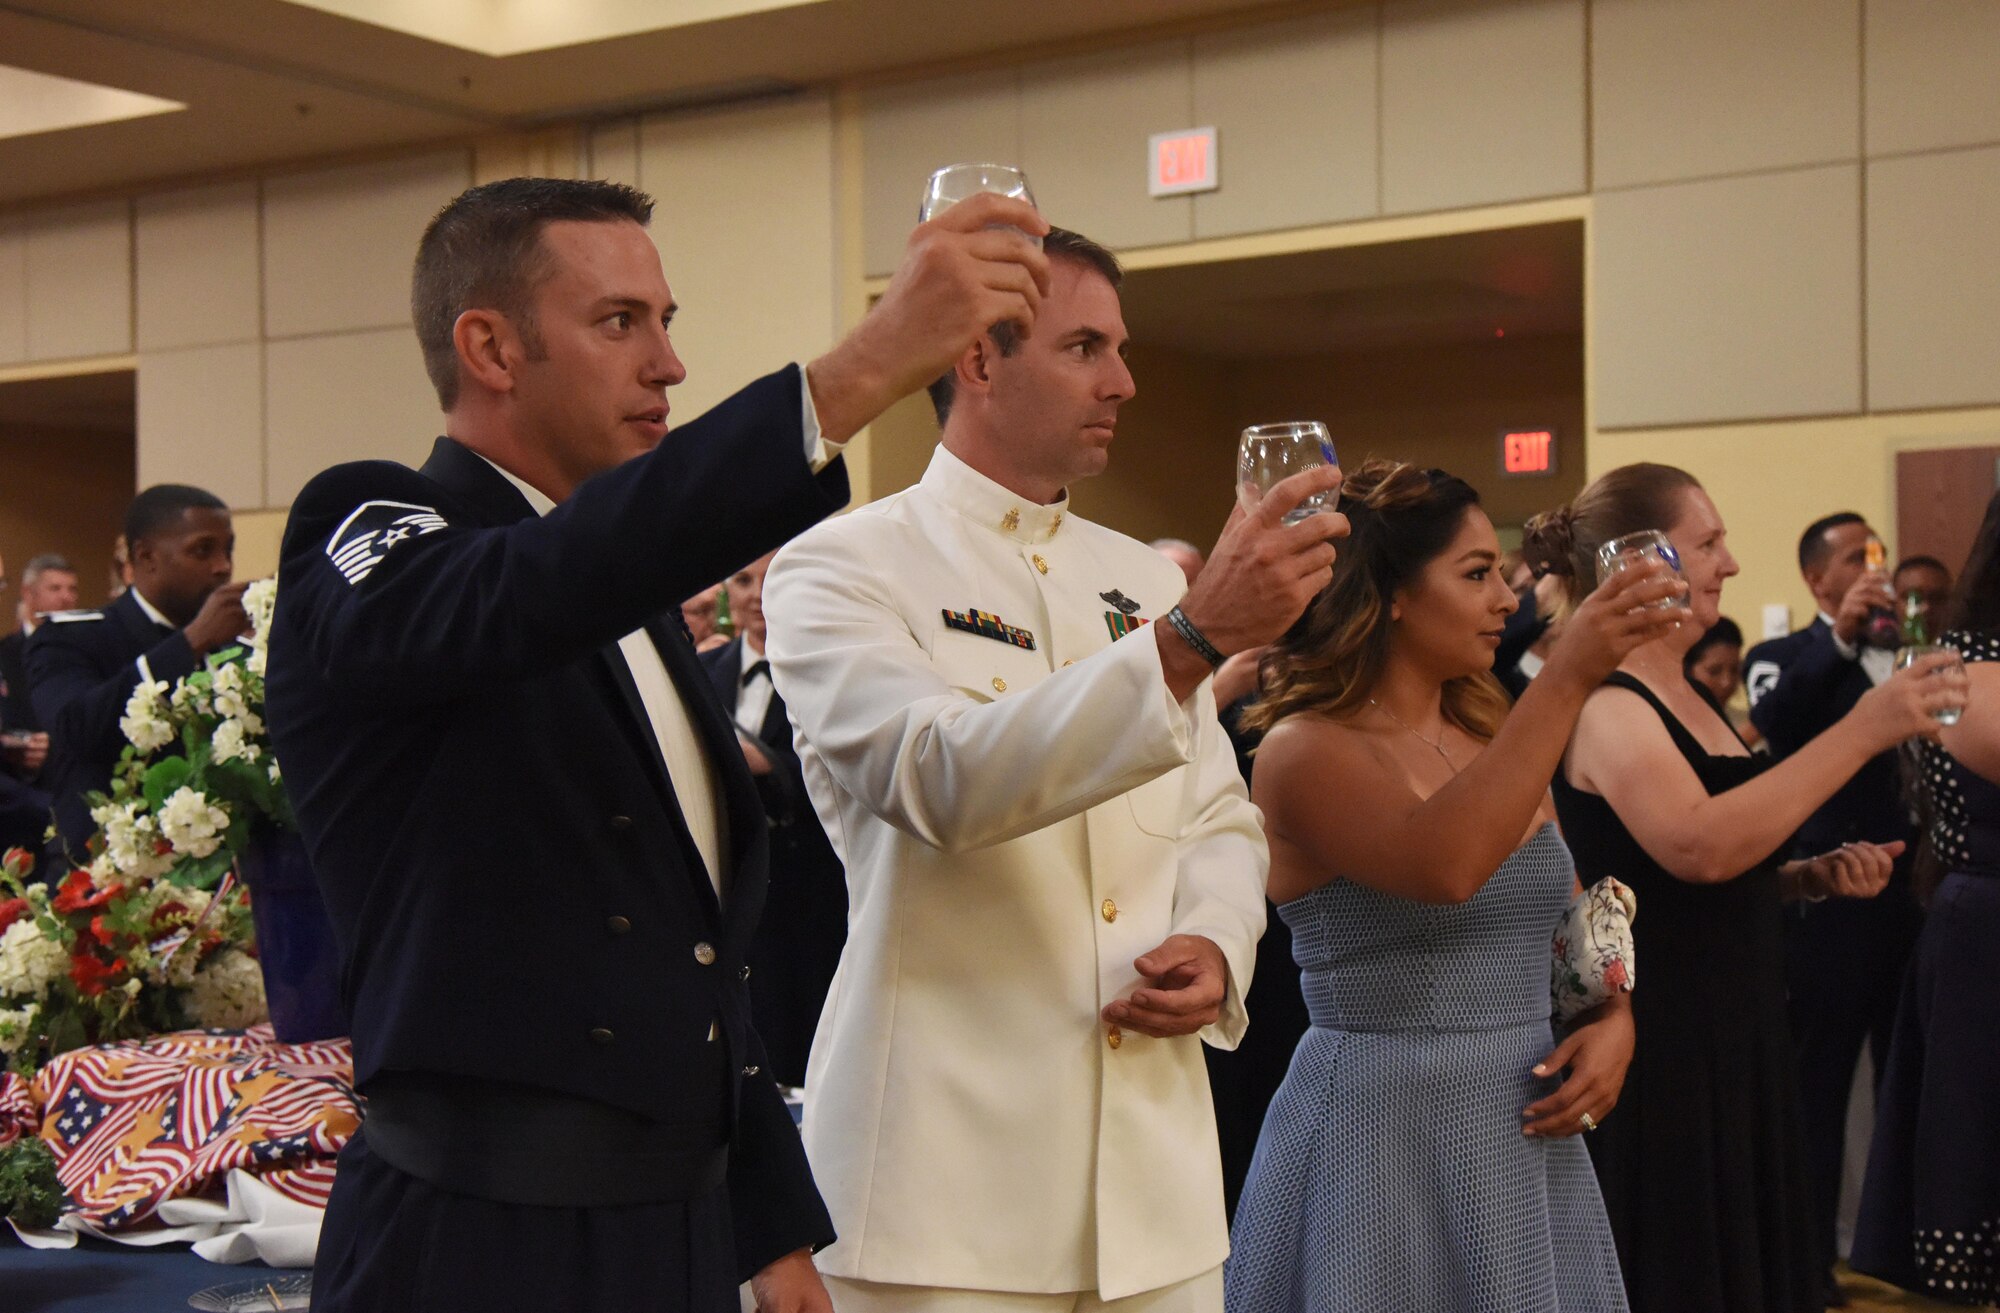 Keesler personnel hold their glasses up for a toast during the U.S. Air Force 70th Birthday Ball at the Bay Breeze Event Center Sept. 16, 2017, on Keesler Air Force Base, Mississippi. The event, hosted by the 81st Training Wing and the John C. Stennis Chapter of the Air Force Association, also paid tribute to all prisoners of war and military members still missing in action. (U.S. Air Force photo by Kemberly Groue)